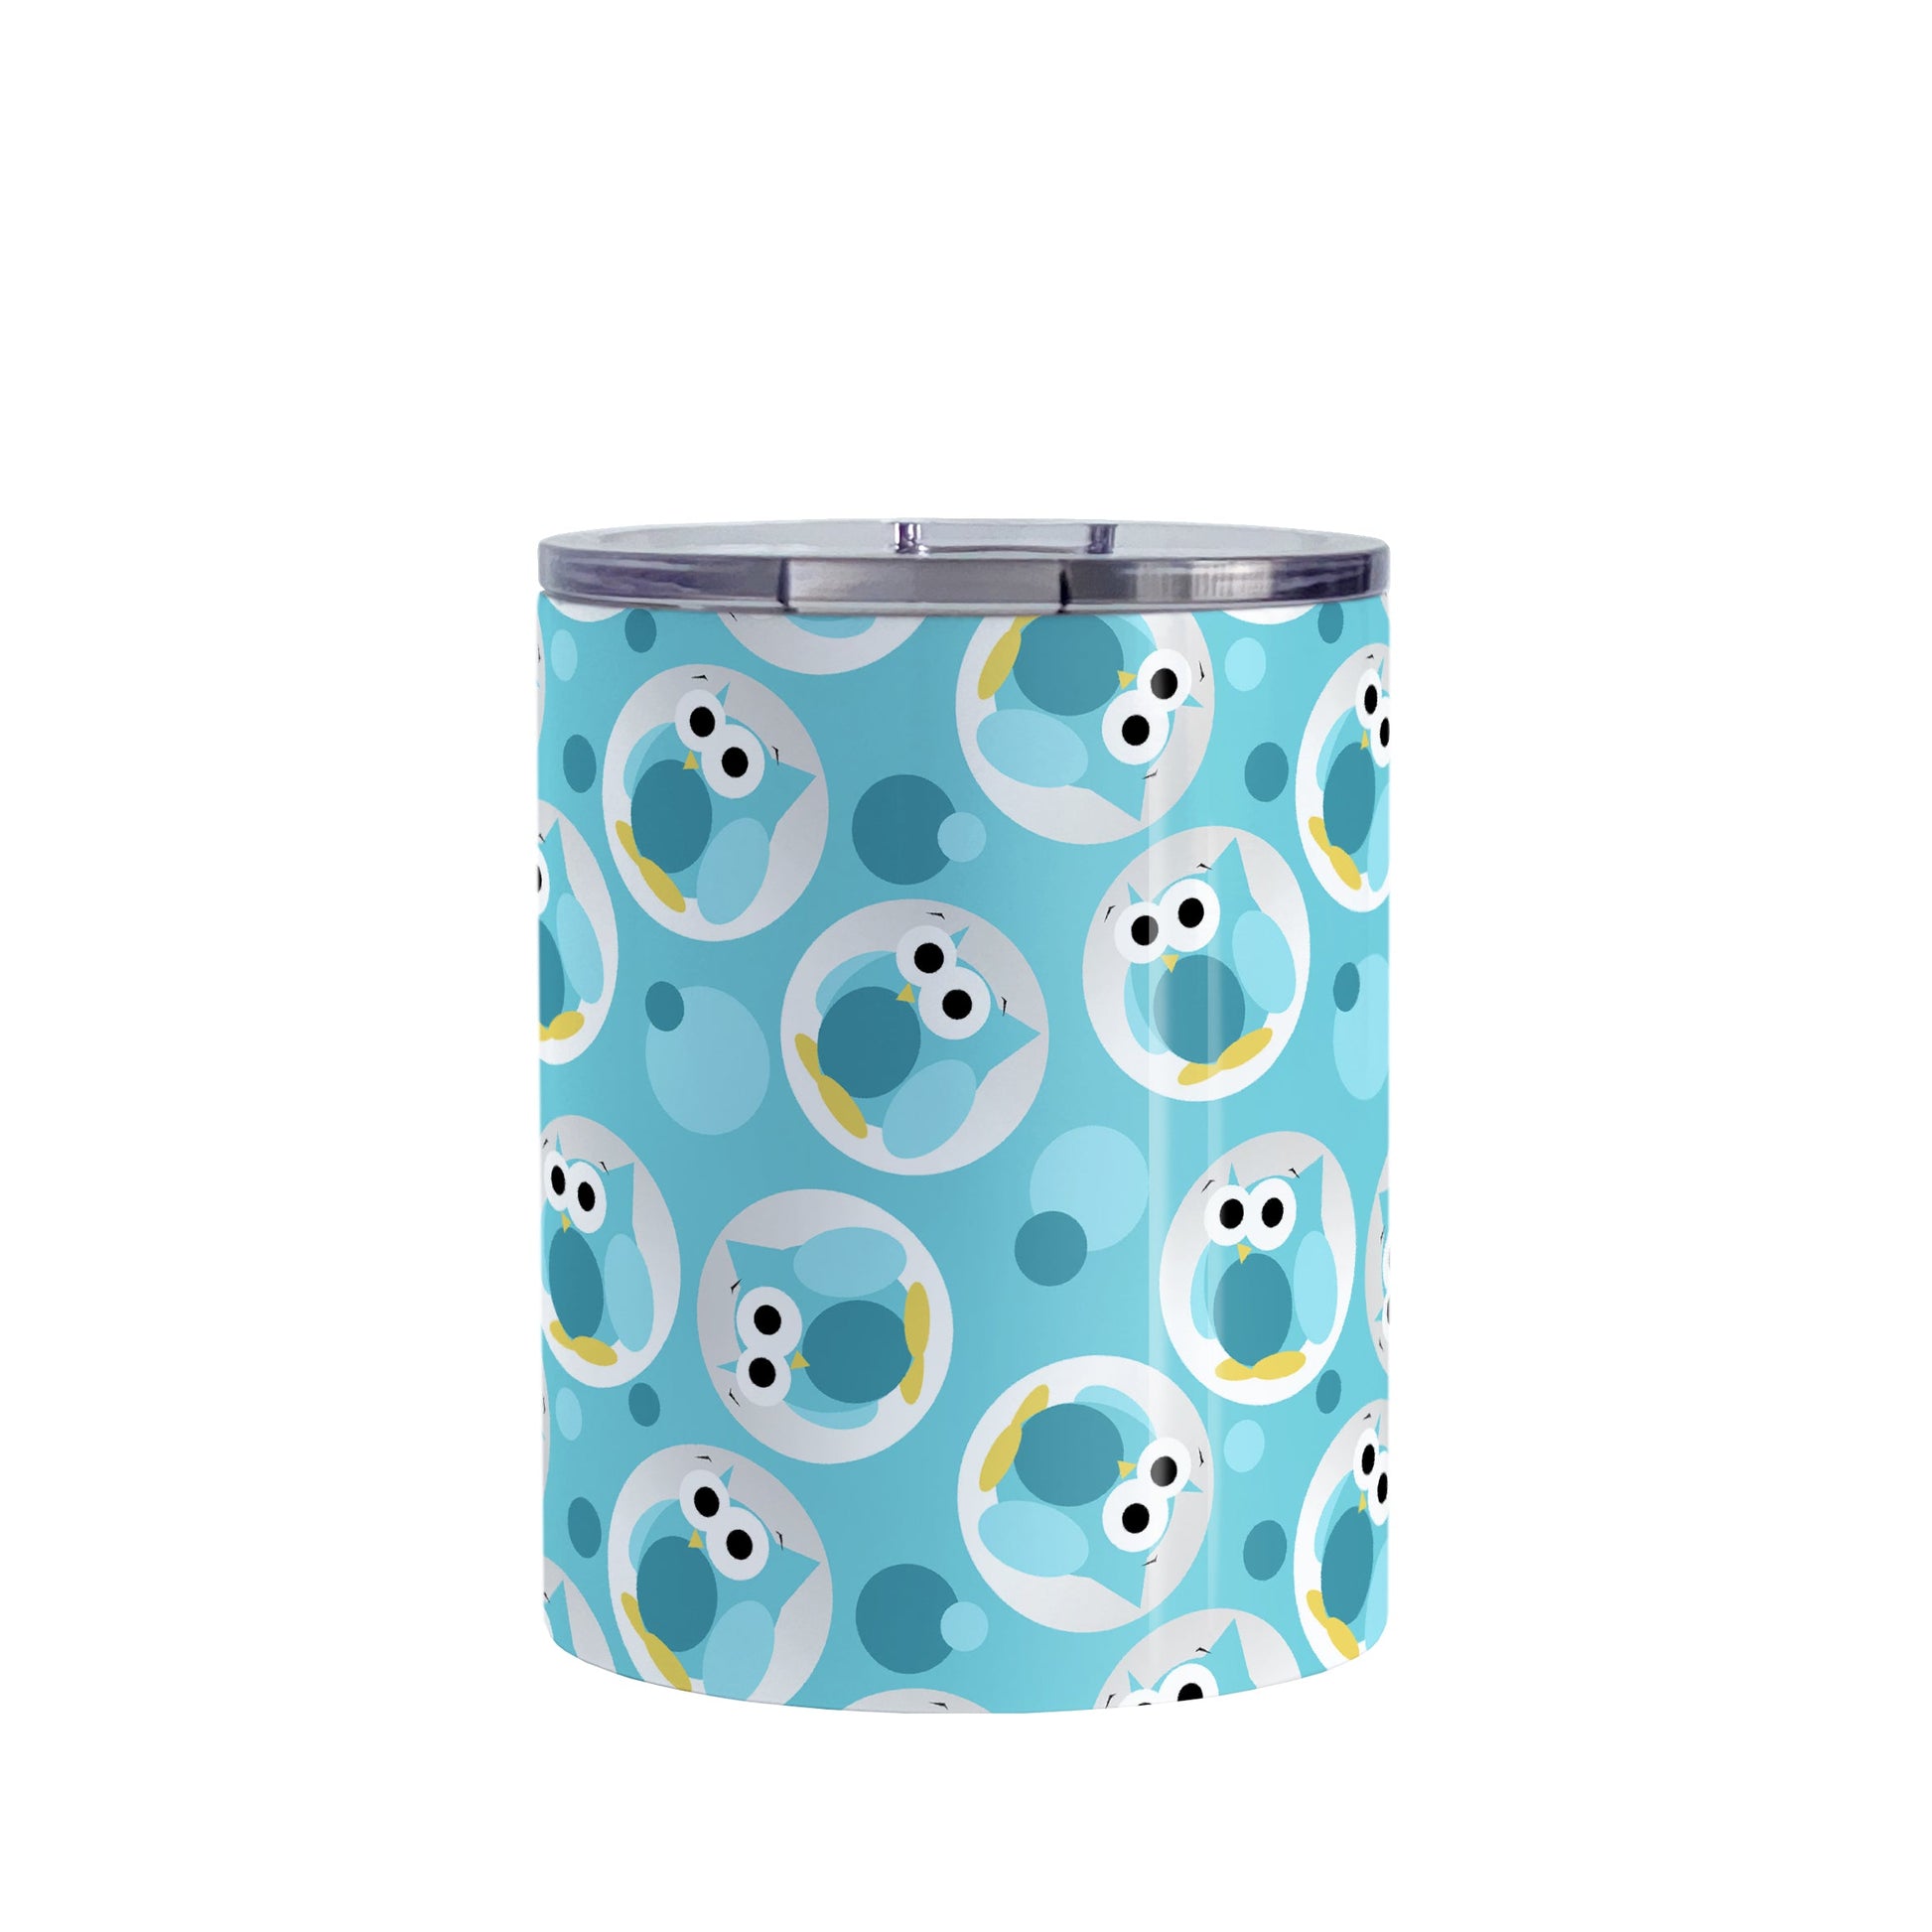 Funny Cute Turquoise Owl Pattern Tumbler Cup (10oz, stainless steel insulated) at Amy's Coffee Mugs